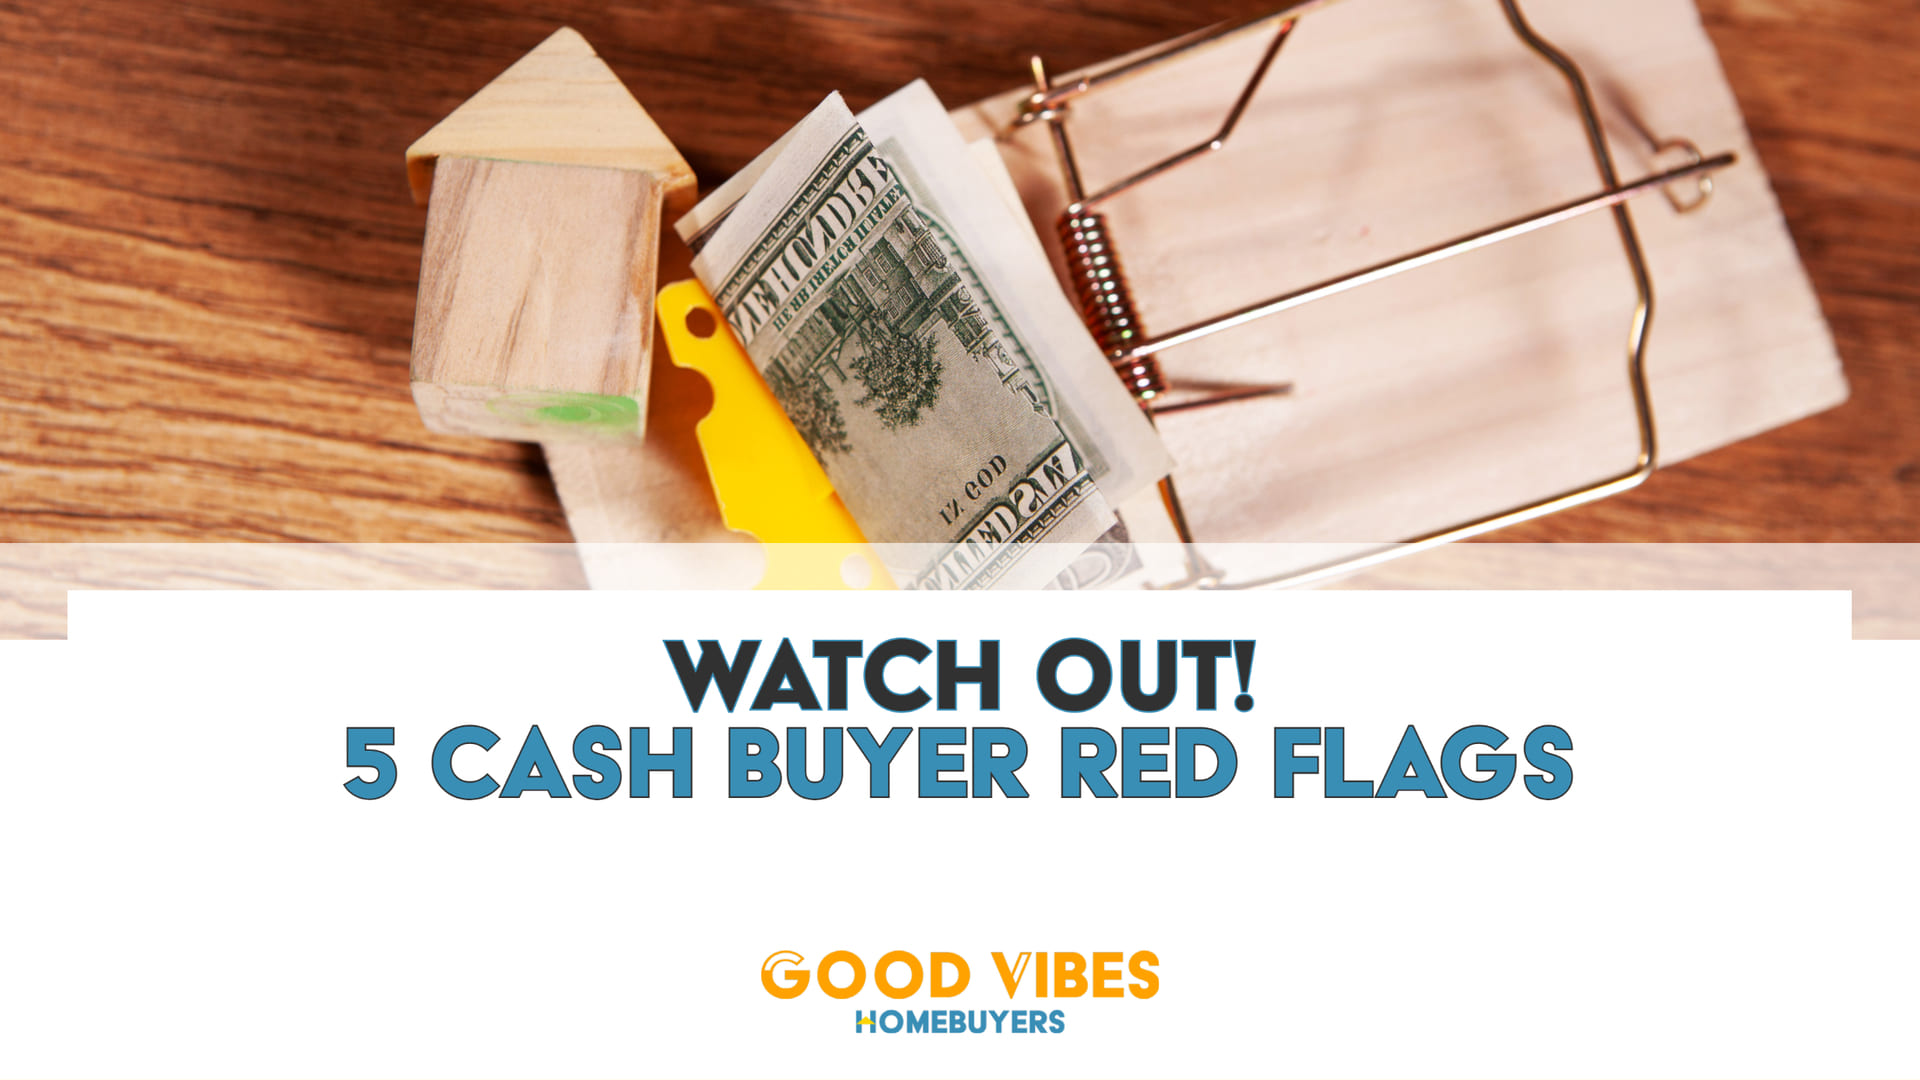 Cash buyer red flags